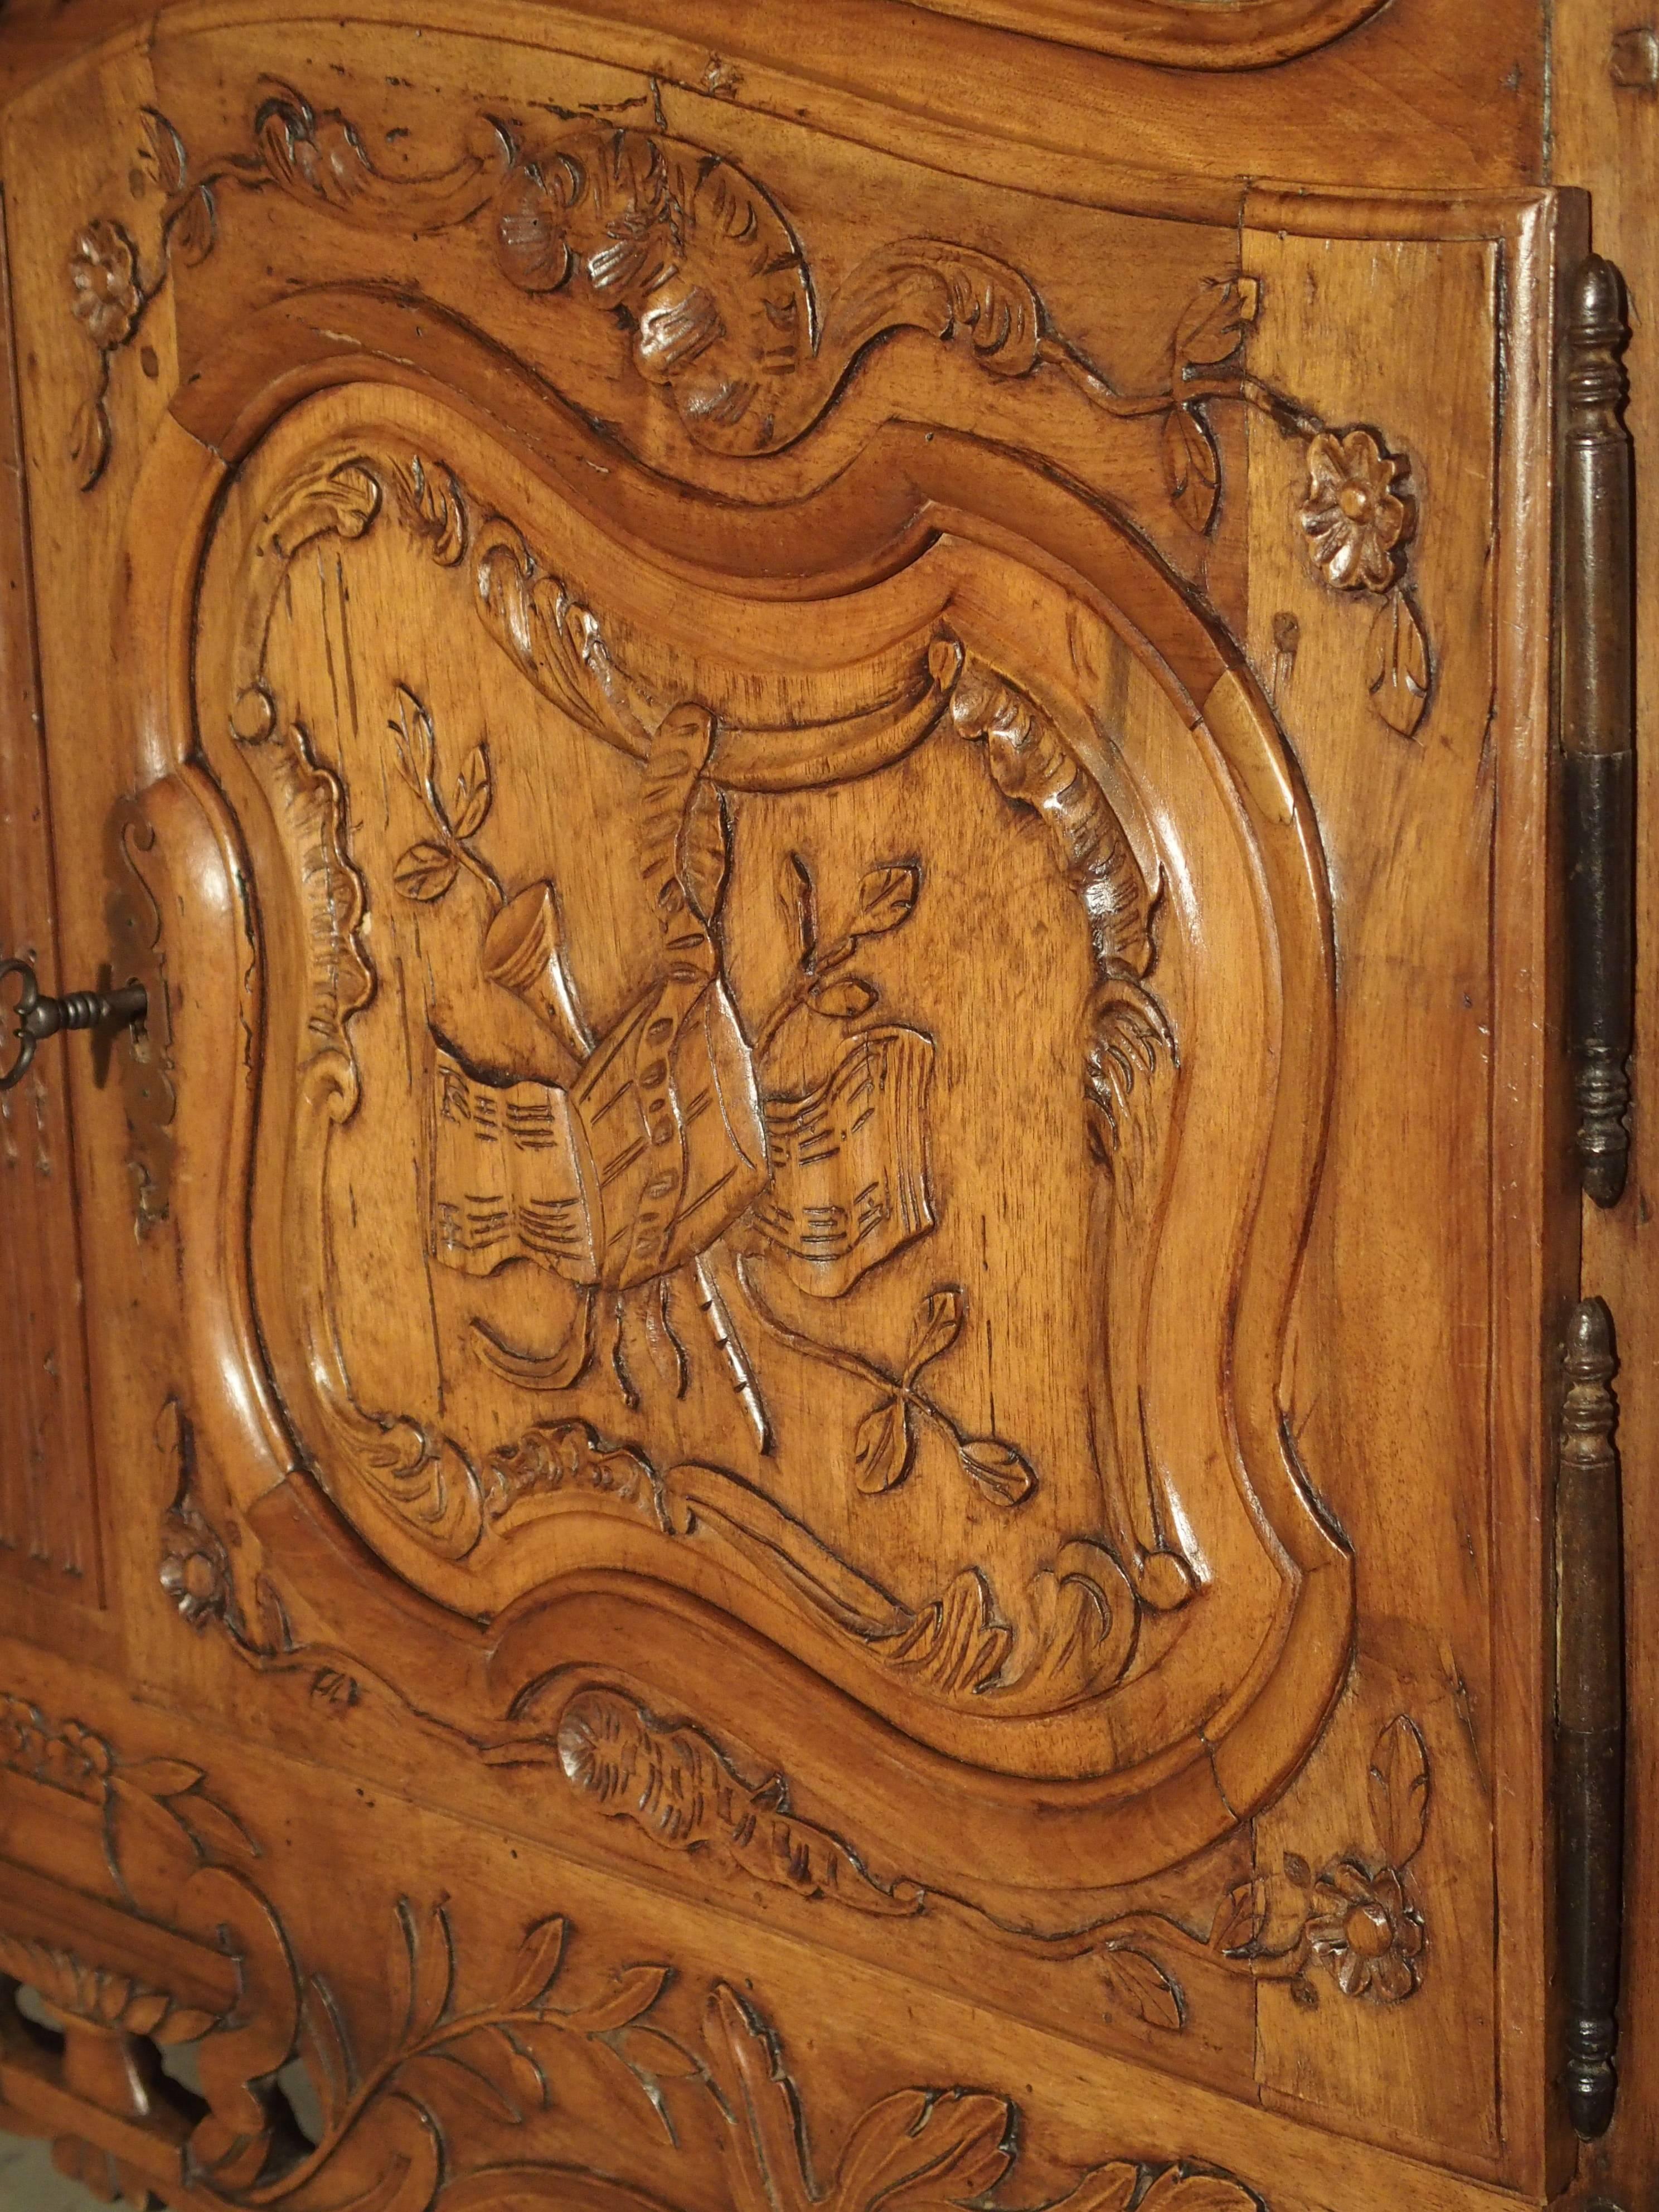 From Provence, this French walnut wood buffet is from the 1800s. The abundant carvings, pierced apron and motifs are all typical of furnishings from the South of France during the 18th-19th century. While typically French and Provencale, the style